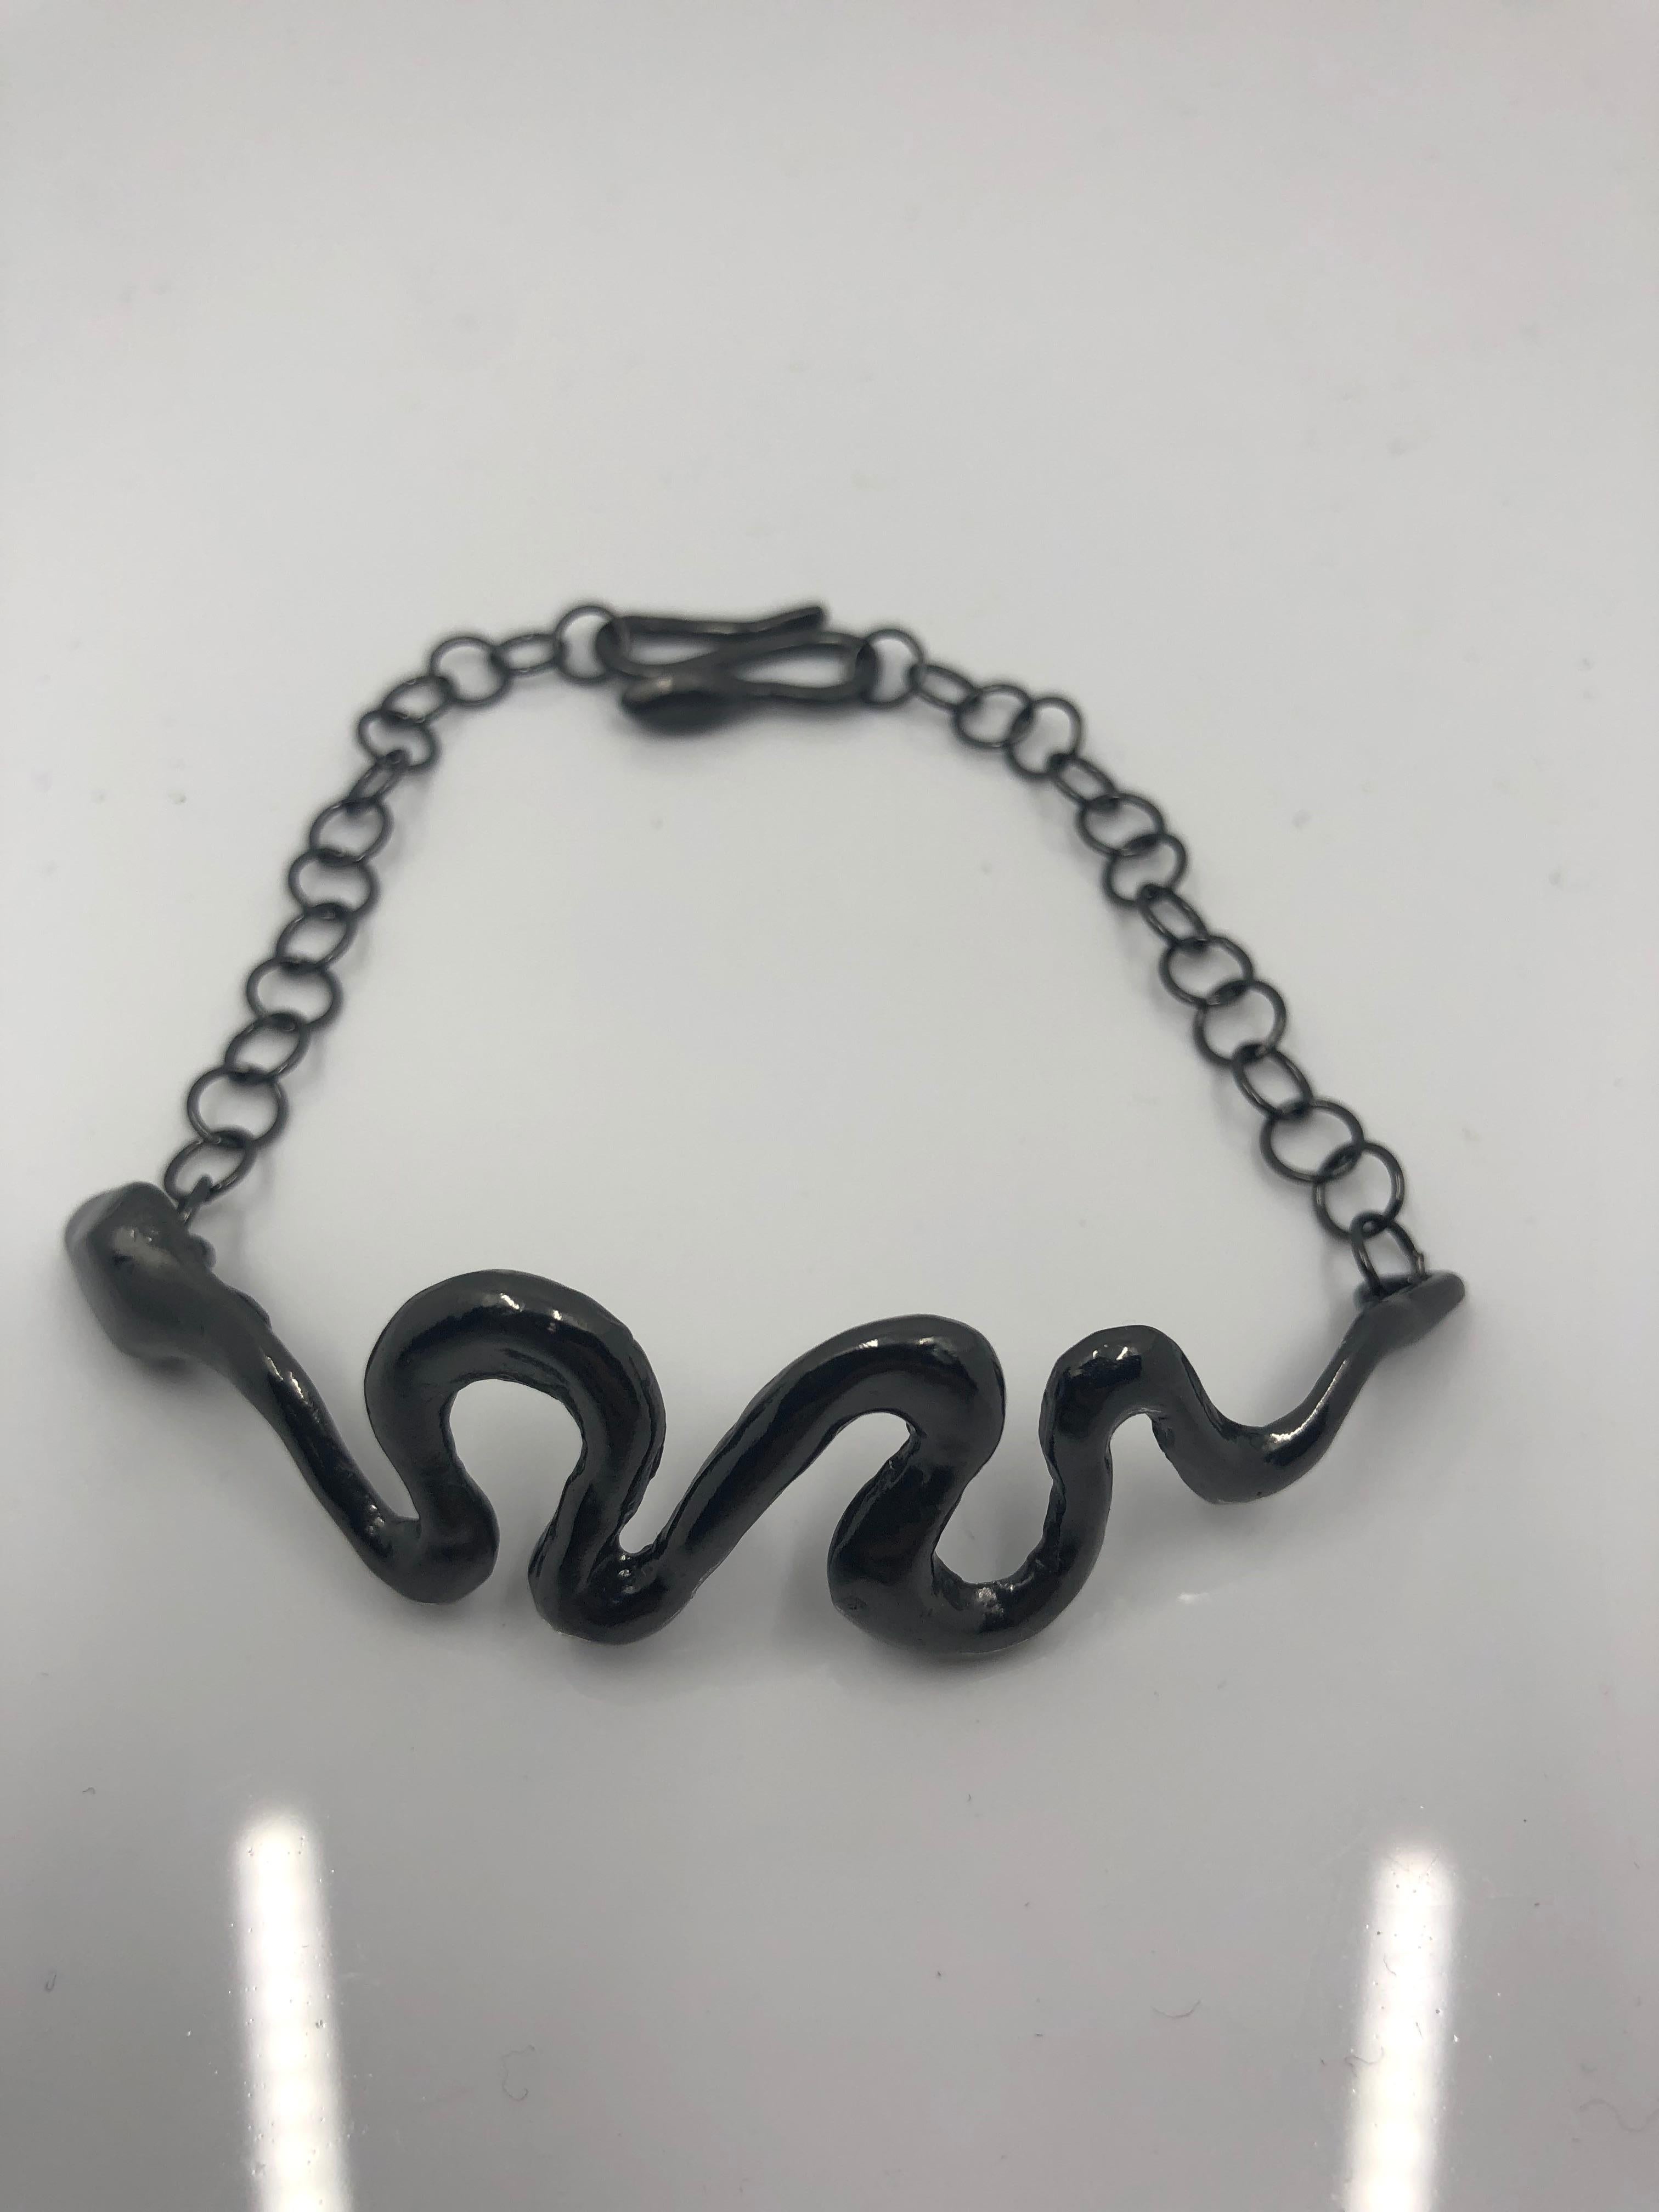 Giulia Barela’s Ribbon bracelet 

A small snake wraps around a wrist sinuously, comforting and protective.

Materials: silver and black rhodium
Weight: 18,3 gr
Lenght: 19 cm clasp included, adjustable. 